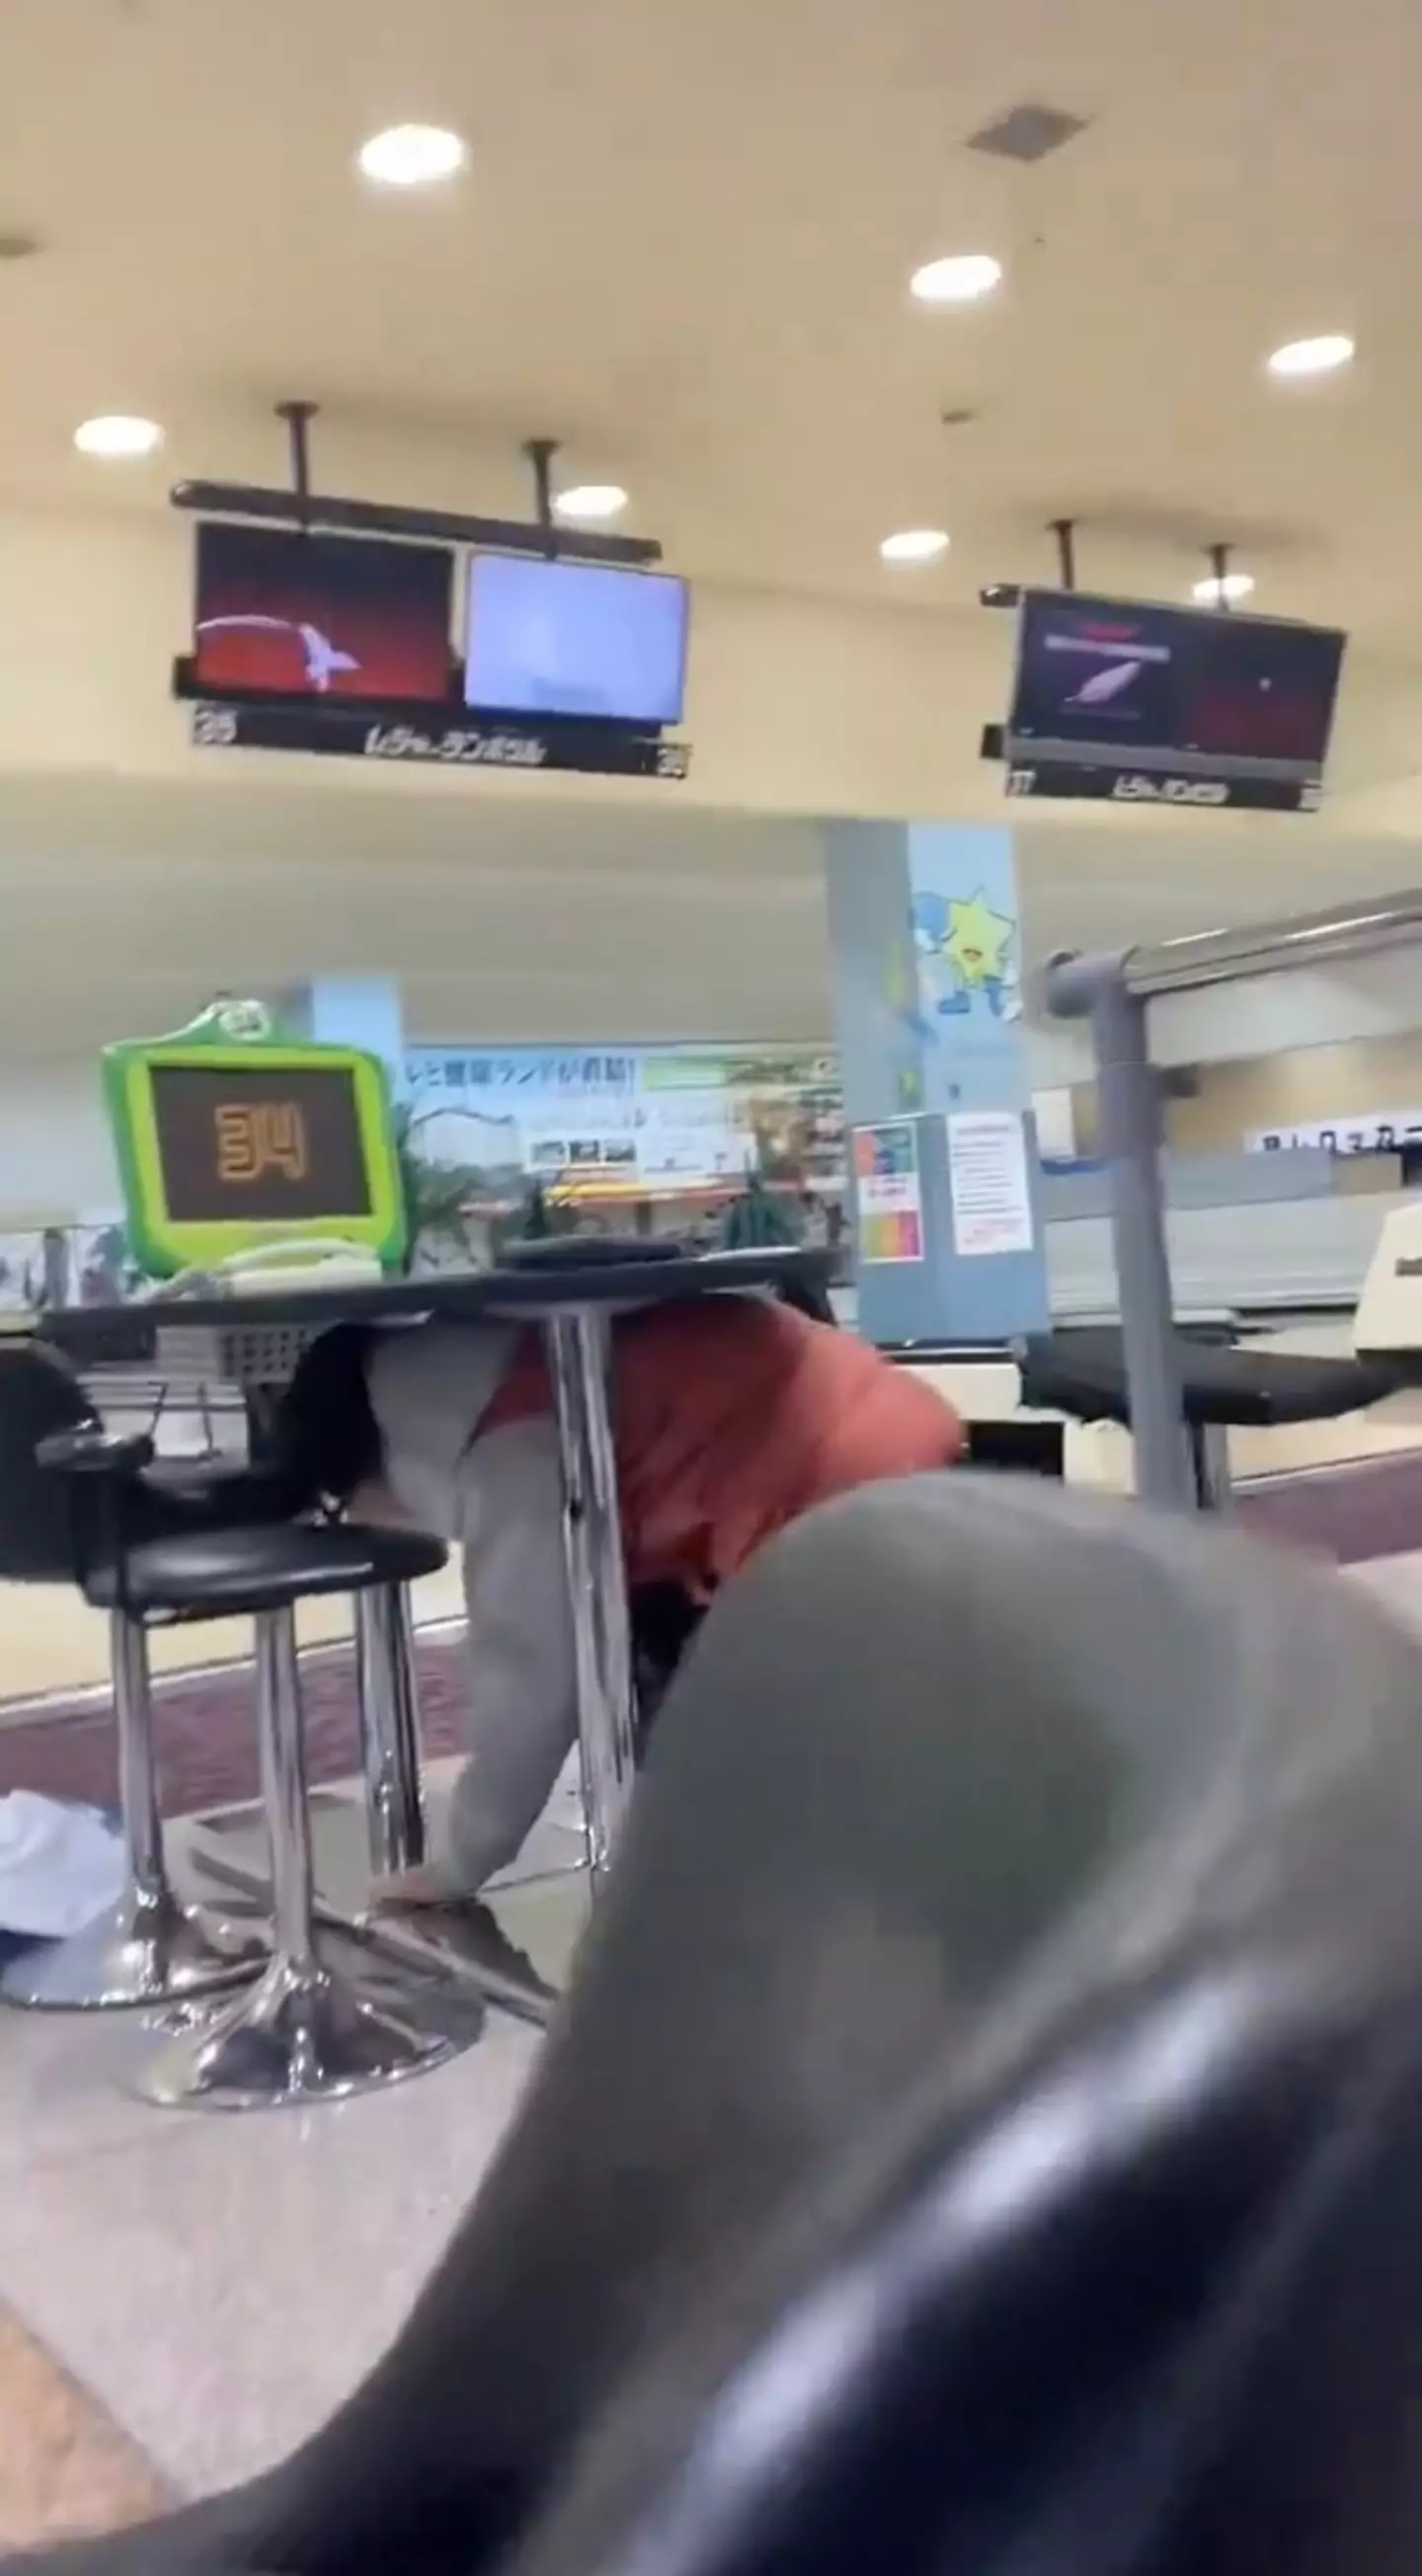 People hid under tables in a bowling alley as an earthquake hit.